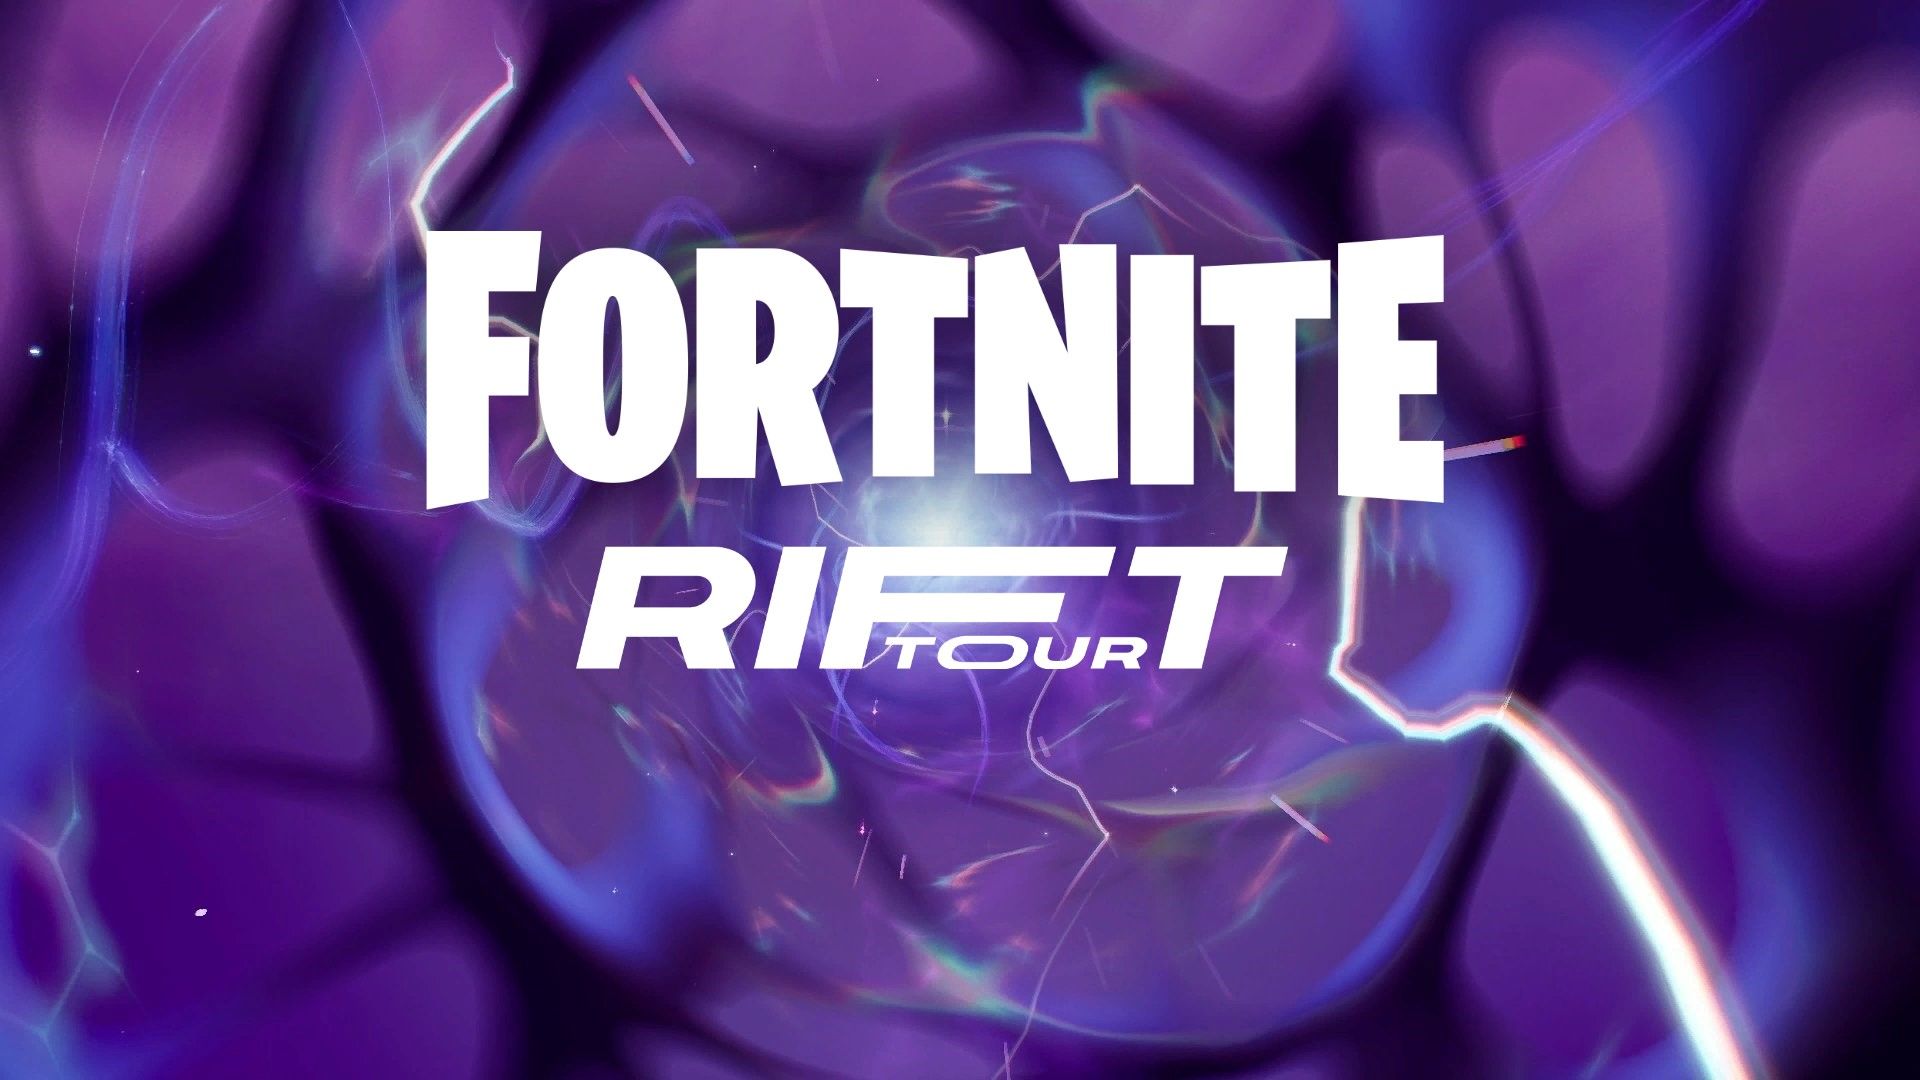 Fortnite Rift Tour Challenge Where To Interact With Rift Tour Posters